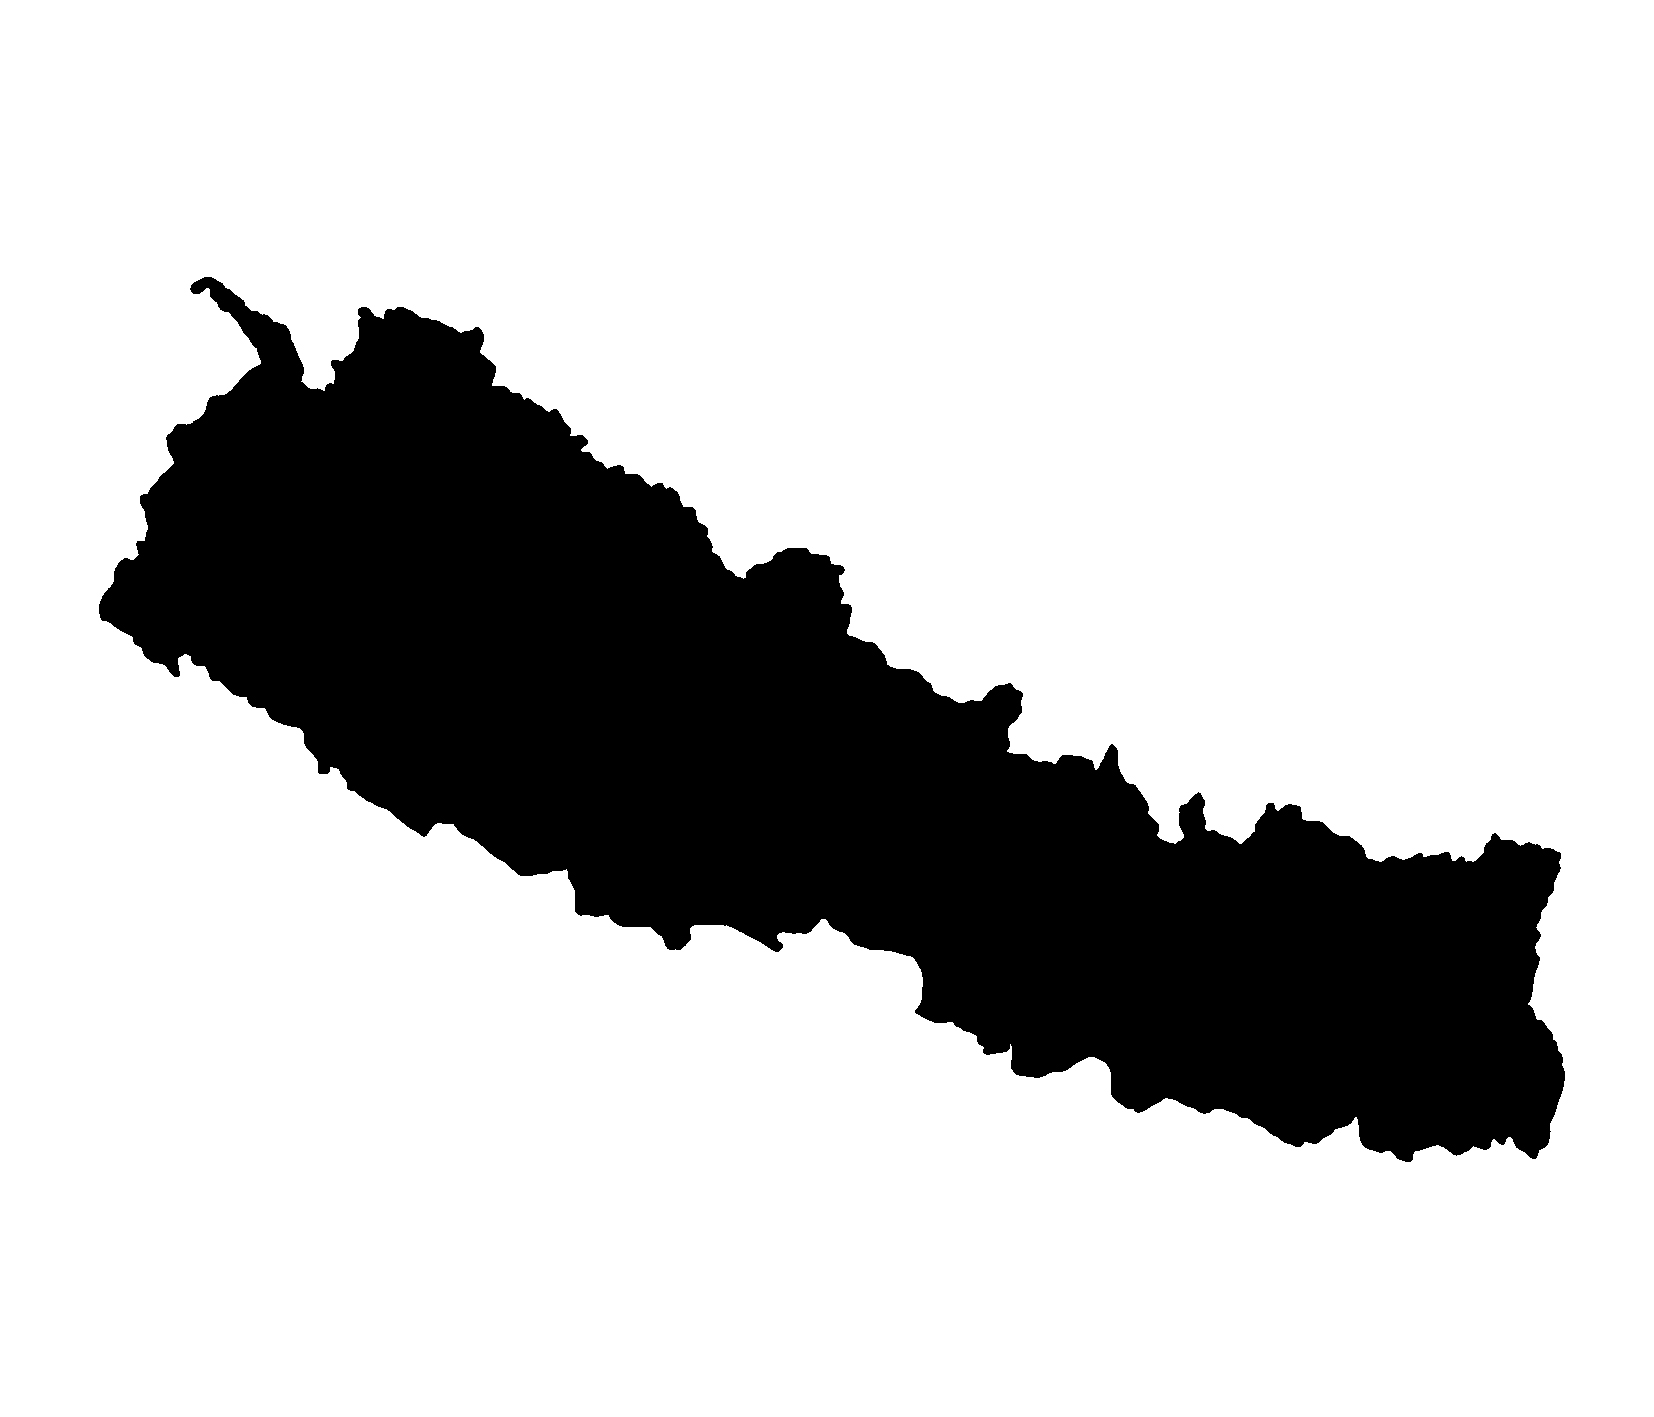 Map of Nepal silhouette